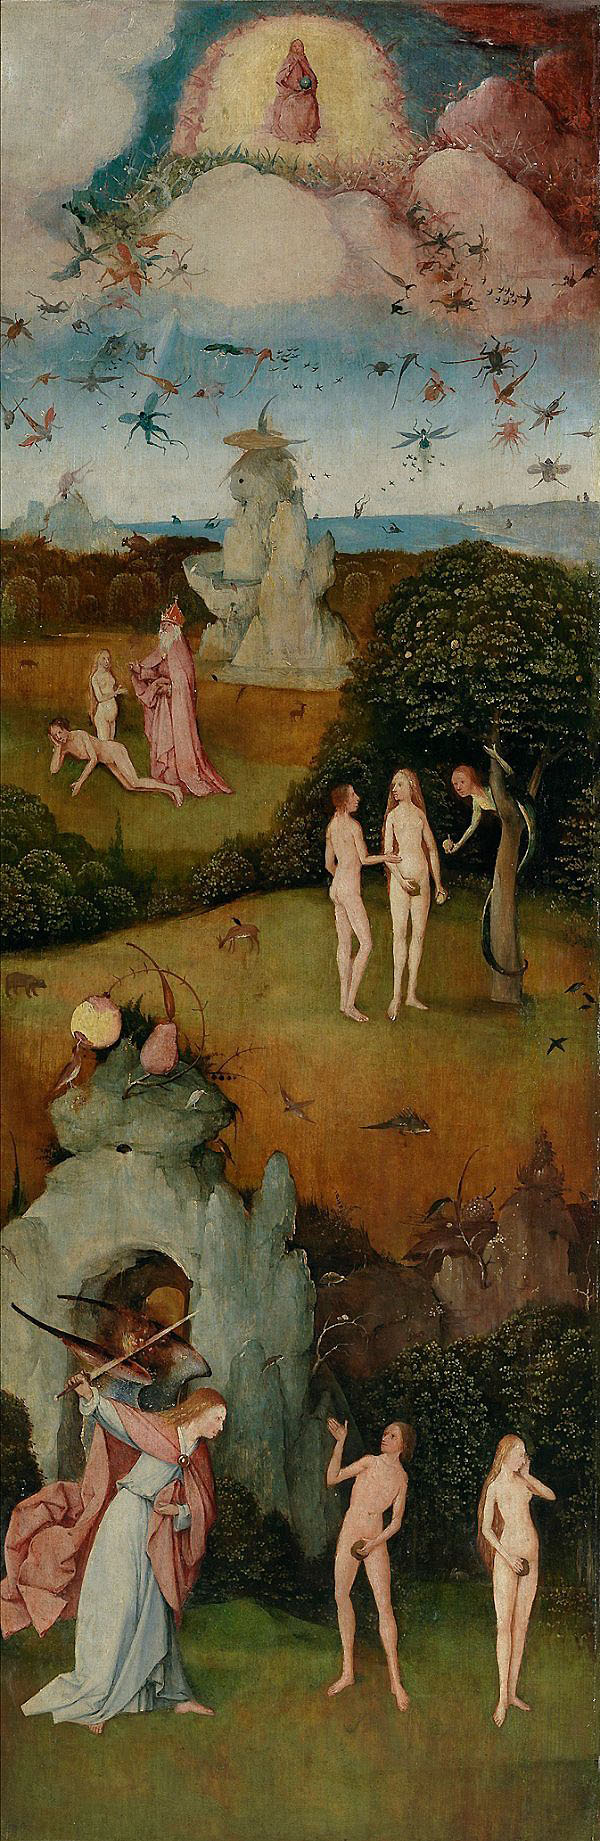 The Haywain Panel 1 by Hieronymus Bosch | Oil Painting Reproduction